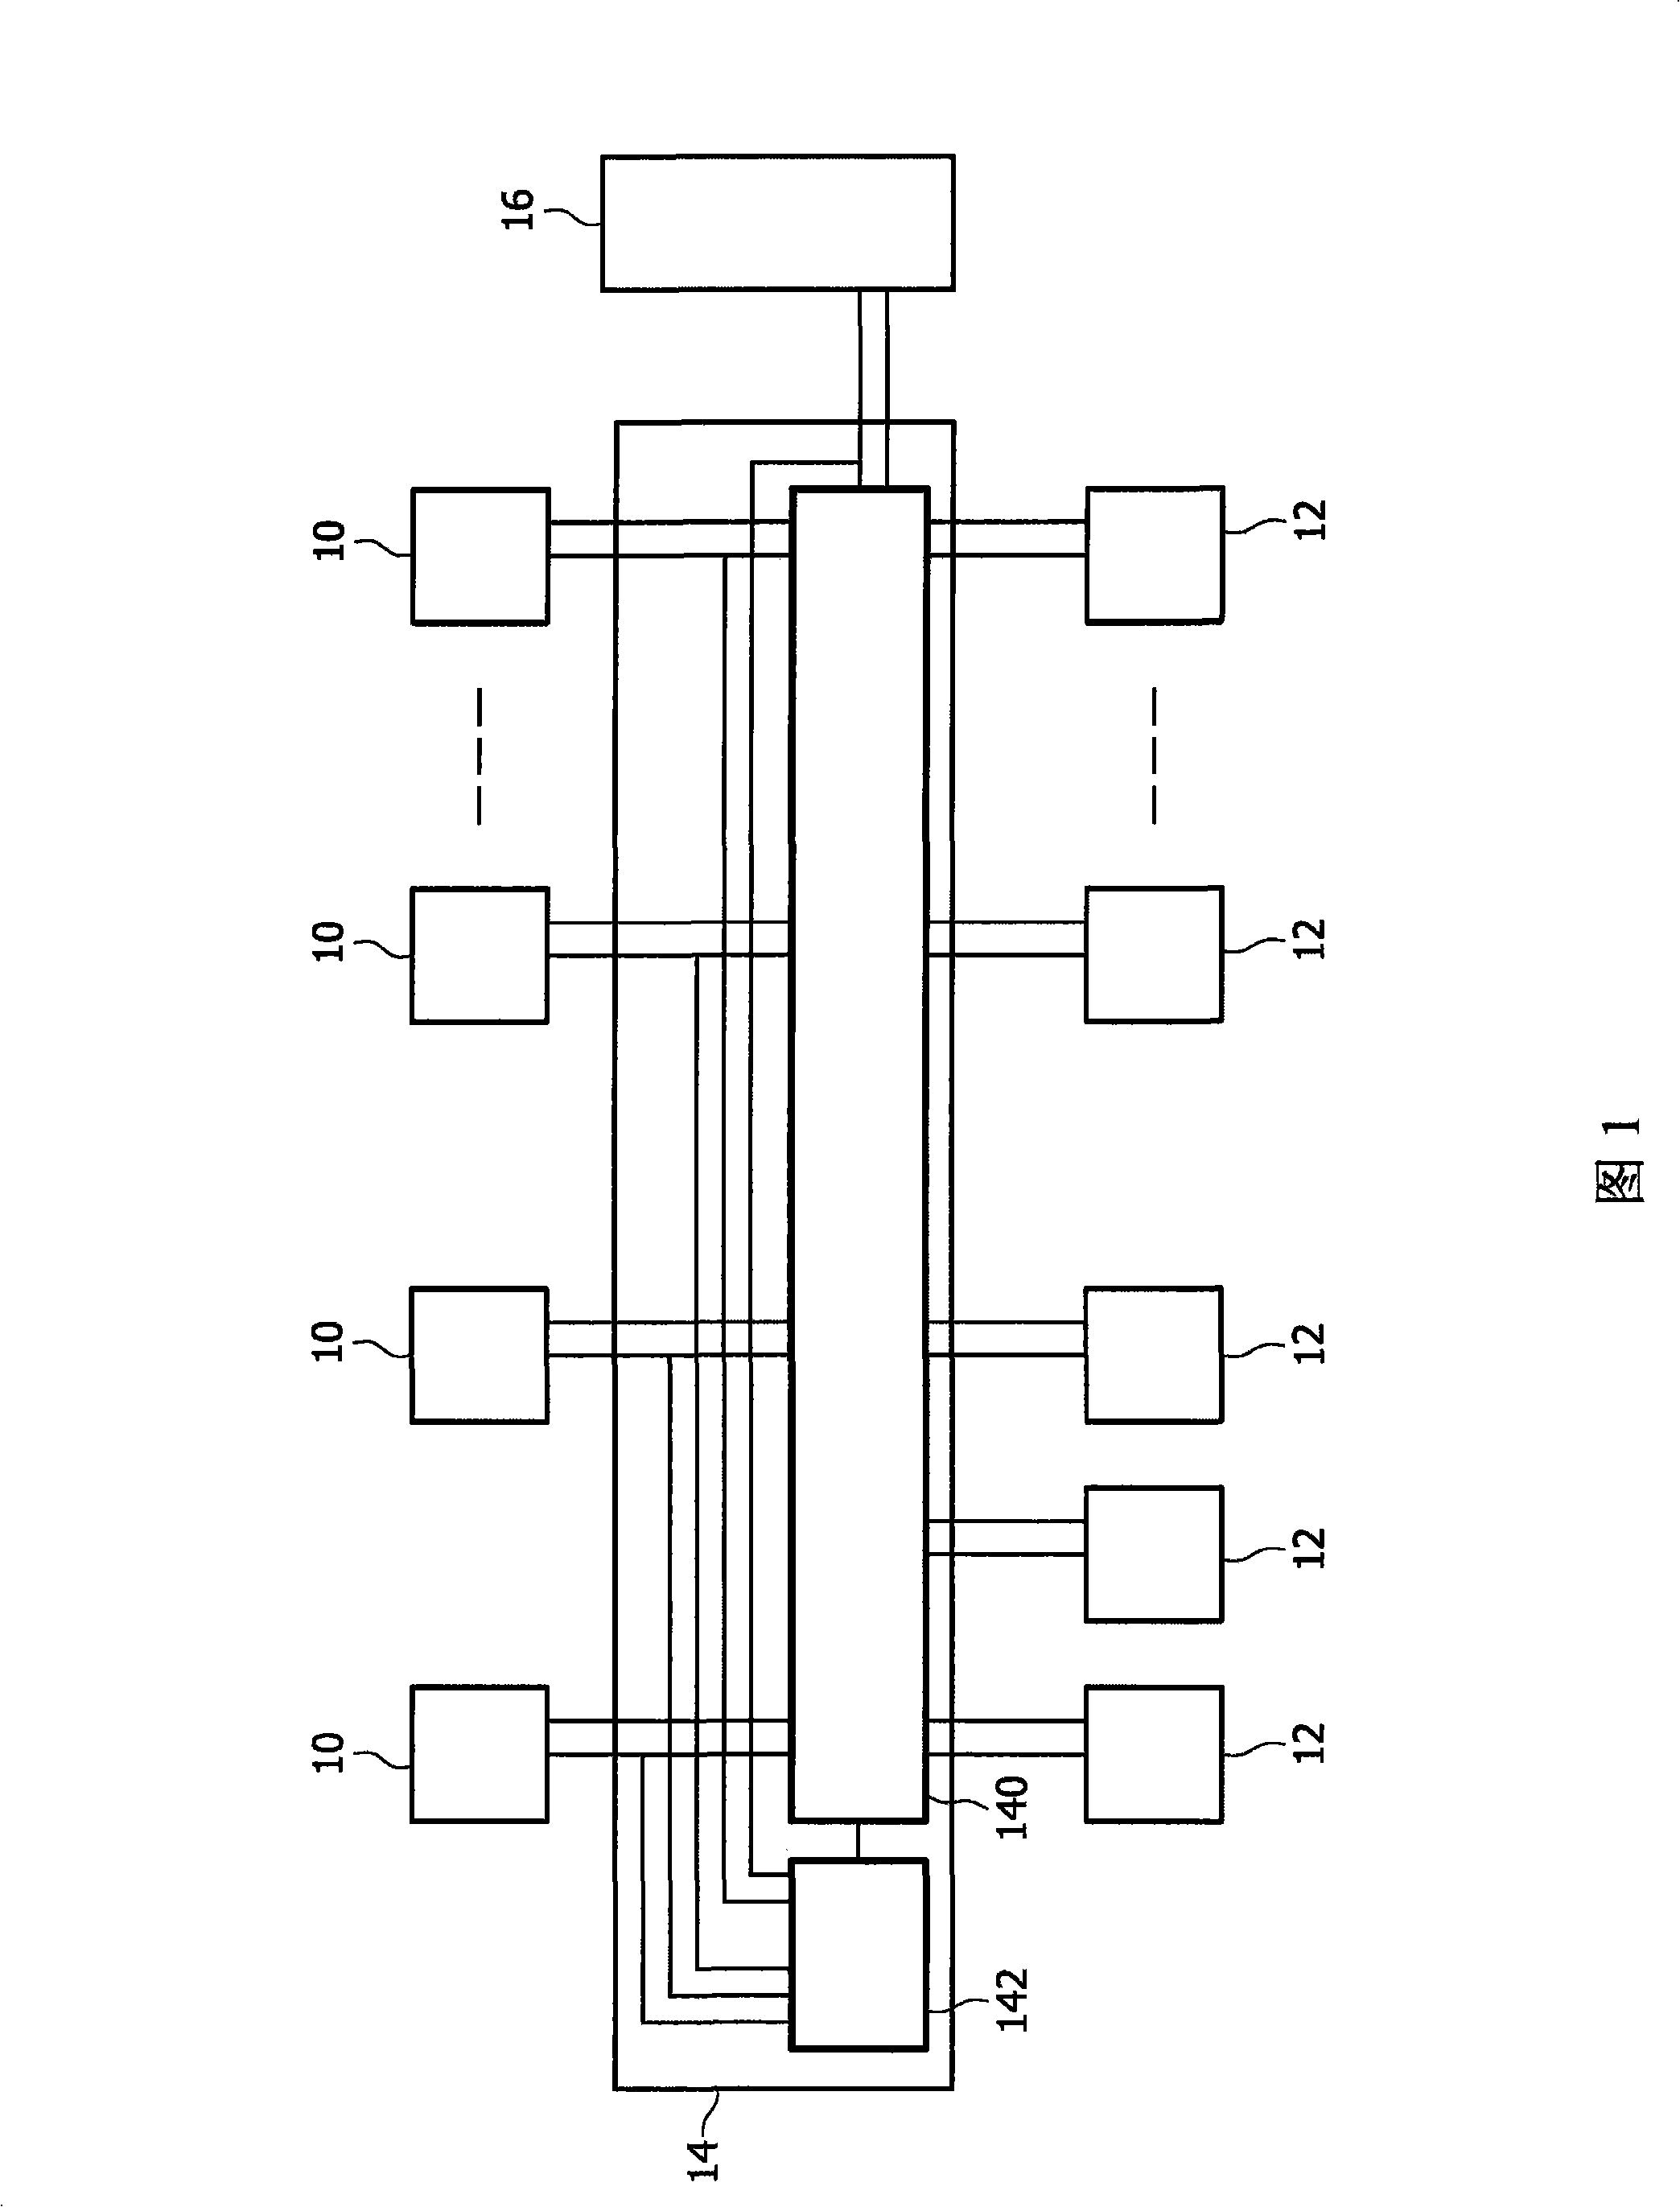 Multi-processor circuit with shared memory banks